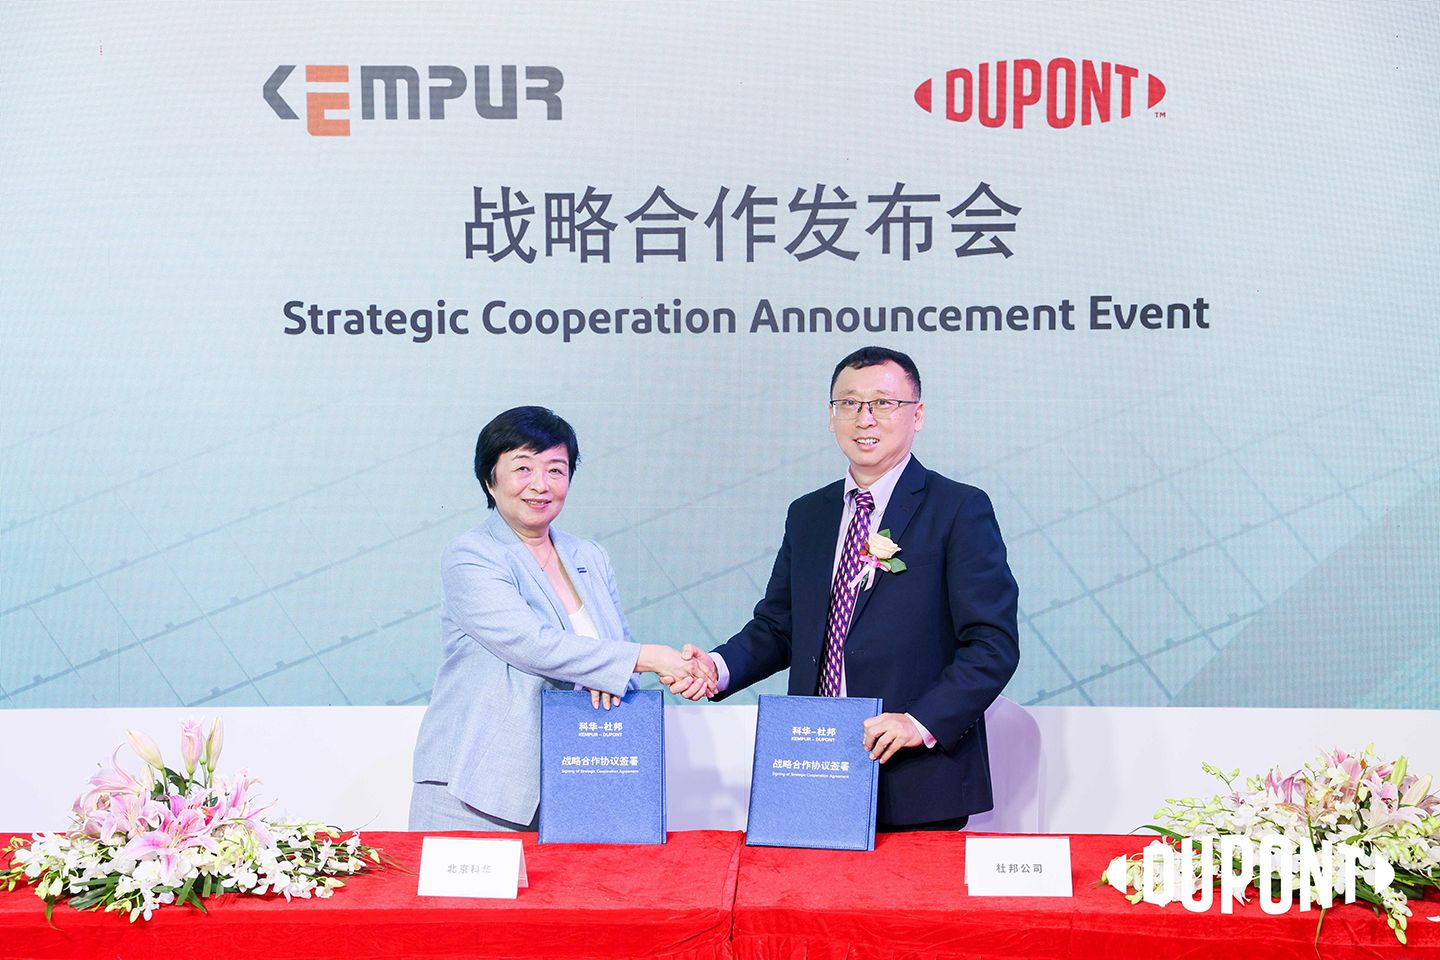 DuPont and Kempur representatives commemorated collaboration